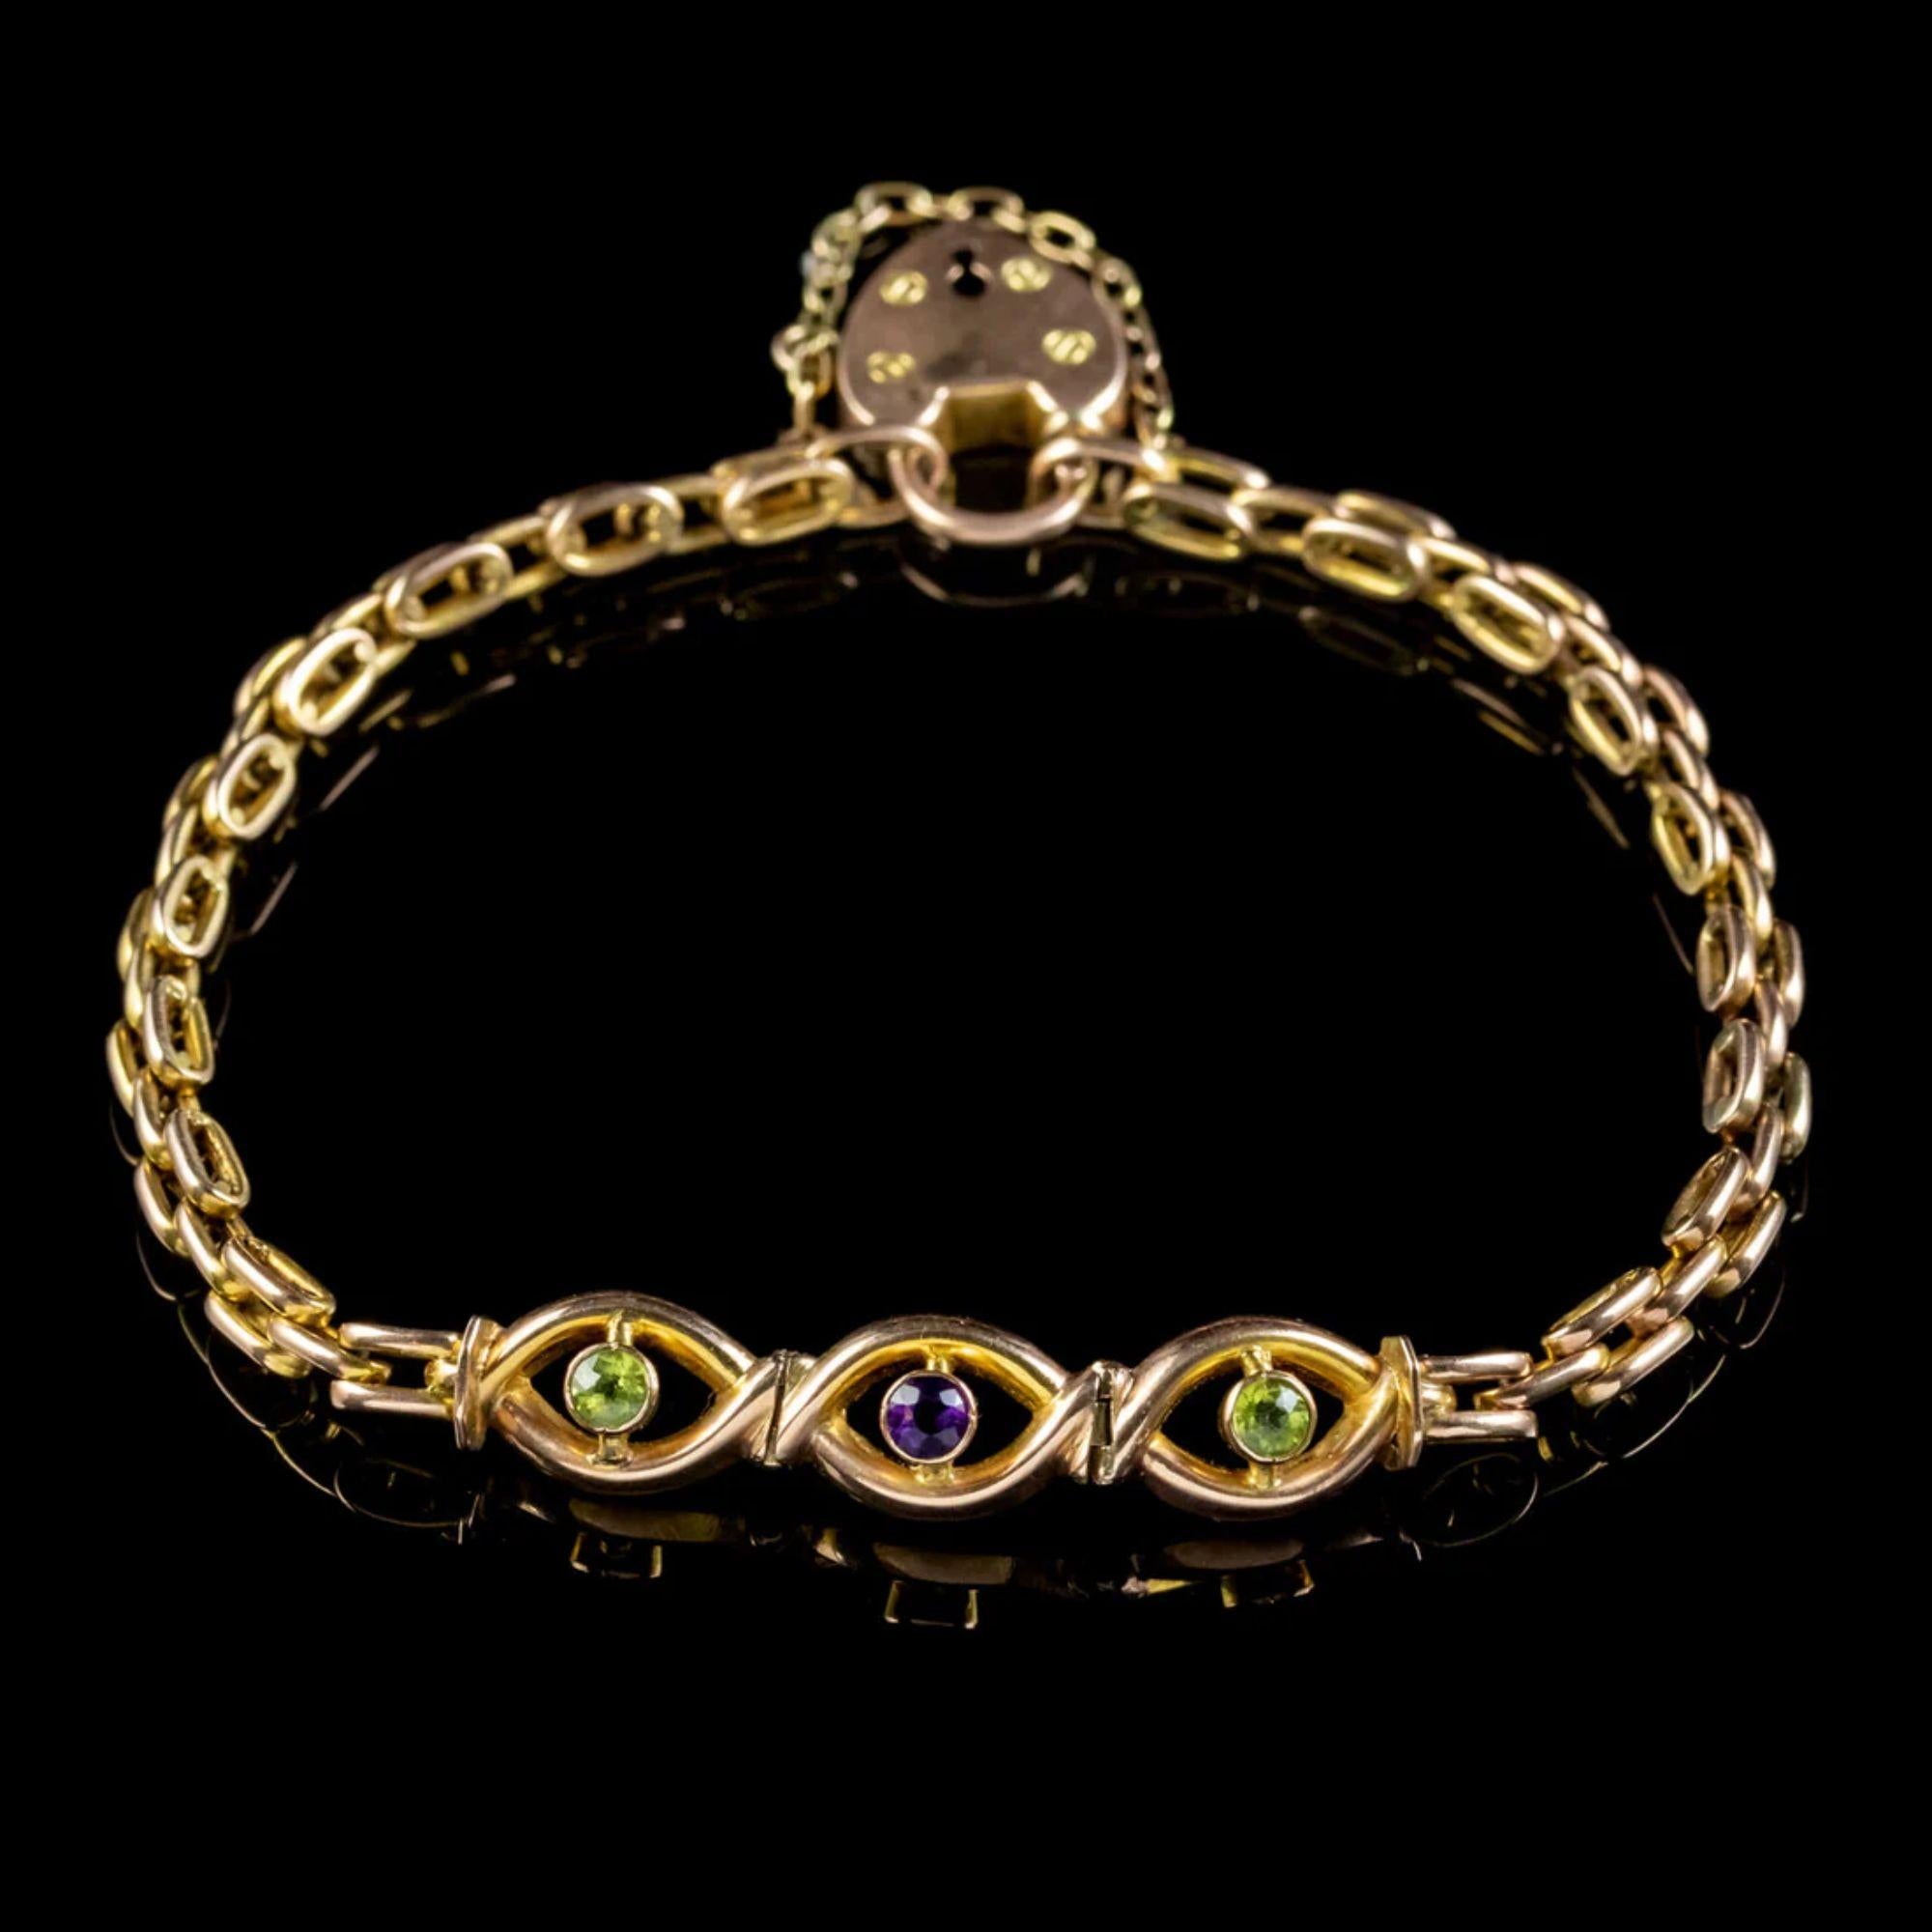 A beautiful Antique Edwardian bracelet from the early 20th Century made up of articulated 9ct Gold links which lead to a lovely open-worked gallery dotted with two Peridots and an Amethyst.

The piece is held by a 9ct heart padlock and safety chain